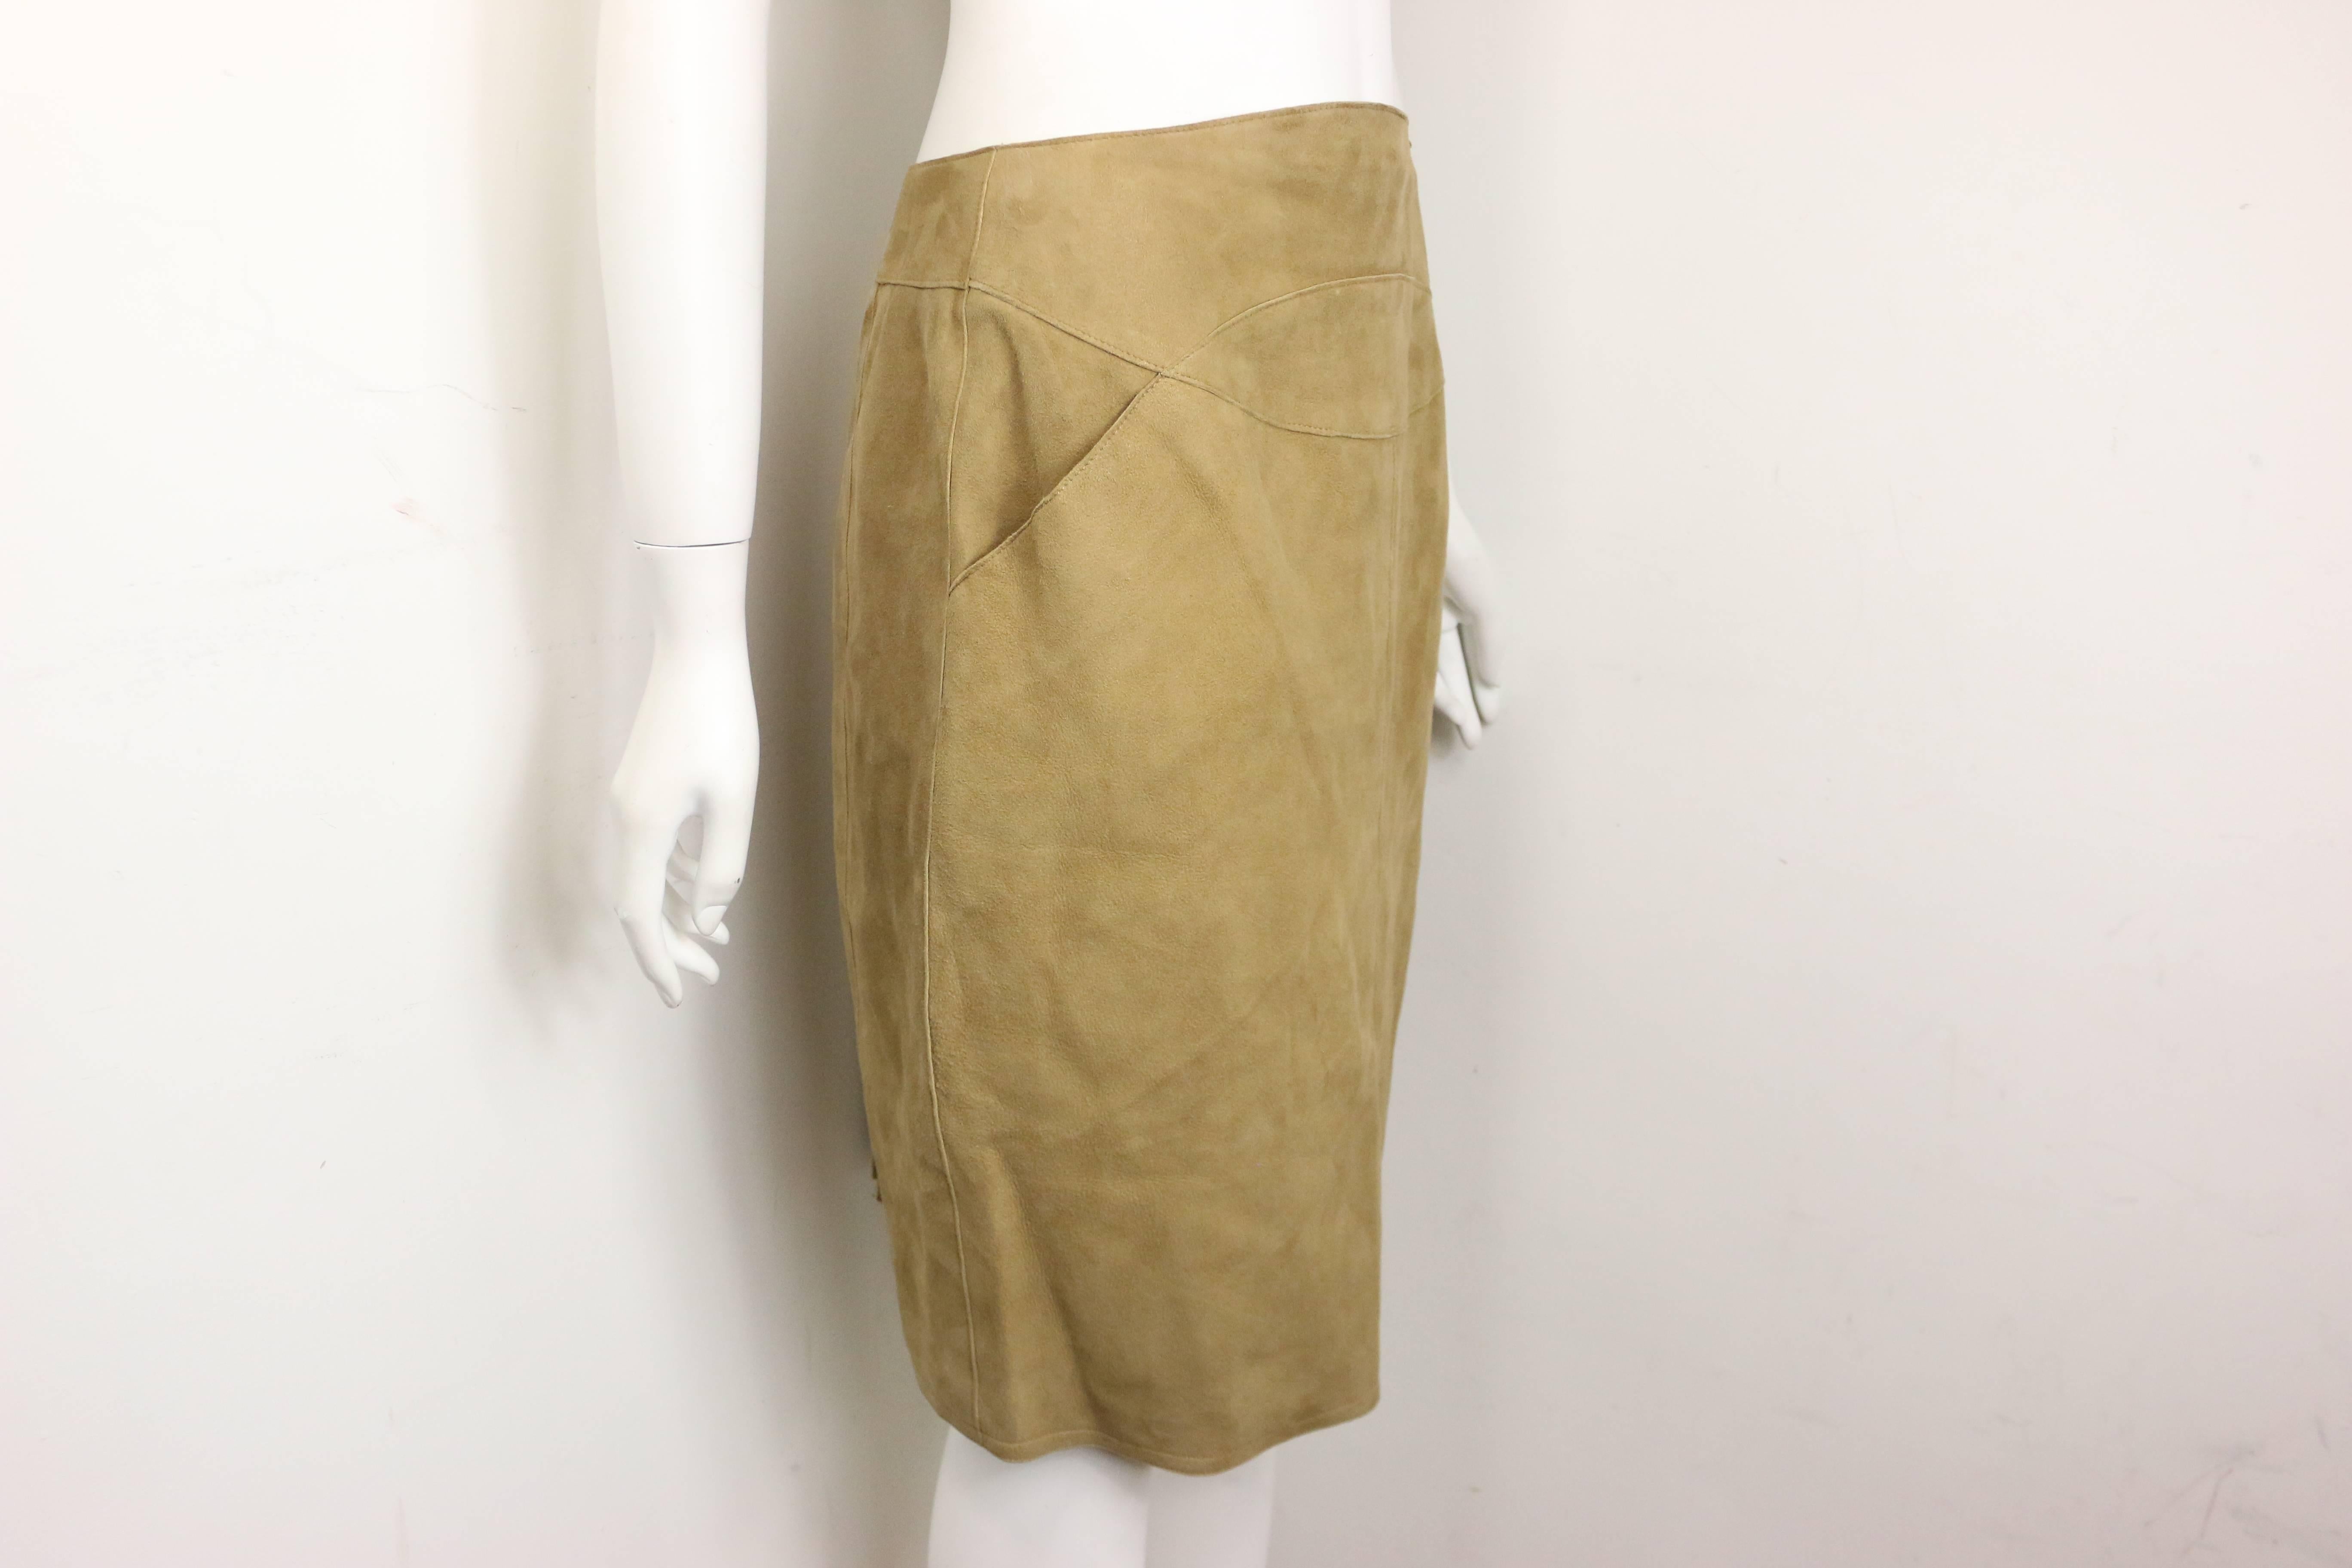 - Vintage Chanel suede lambskin leather knee length pencil skirt from 1999 A/W collection. This sexy and luxury knee length pencil skirt can be worn with many things. The silk lining is always a comfort touch!  

- Featuring two side pockets.   

-